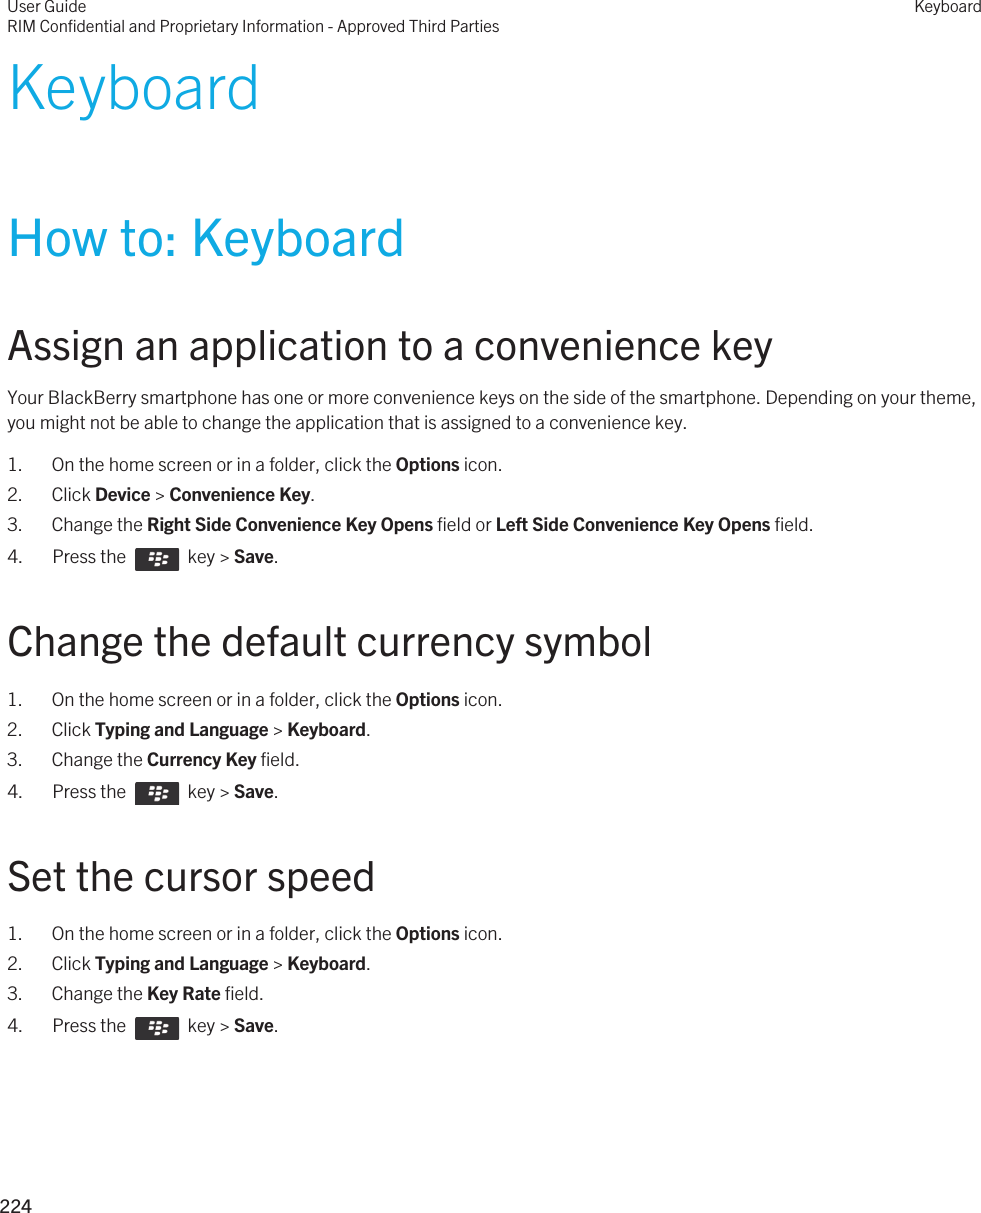 KeyboardHow to: KeyboardAssign an application to a convenience keyYour BlackBerry smartphone has one or more convenience keys on the side of the smartphone. Depending on your theme, you might not be able to change the application that is assigned to a convenience key.1. On the home screen or in a folder, click the Options icon.2. Click Device &gt; Convenience Key.3. Change the Right Side Convenience Key Opens field or Left Side Convenience Key Opens field.4.  Press the    key &gt; Save. Change the default currency symbol1. On the home screen or in a folder, click the Options icon.2. Click Typing and Language &gt; Keyboard.3. Change the Currency Key field.4.  Press the    key &gt; Save. Set the cursor speed1. On the home screen or in a folder, click the Options icon.2. Click Typing and Language &gt; Keyboard.3. Change the Key Rate field.4.  Press the    key &gt; Save. User GuideRIM Confidential and Proprietary Information - Approved Third PartiesKeyboard224 